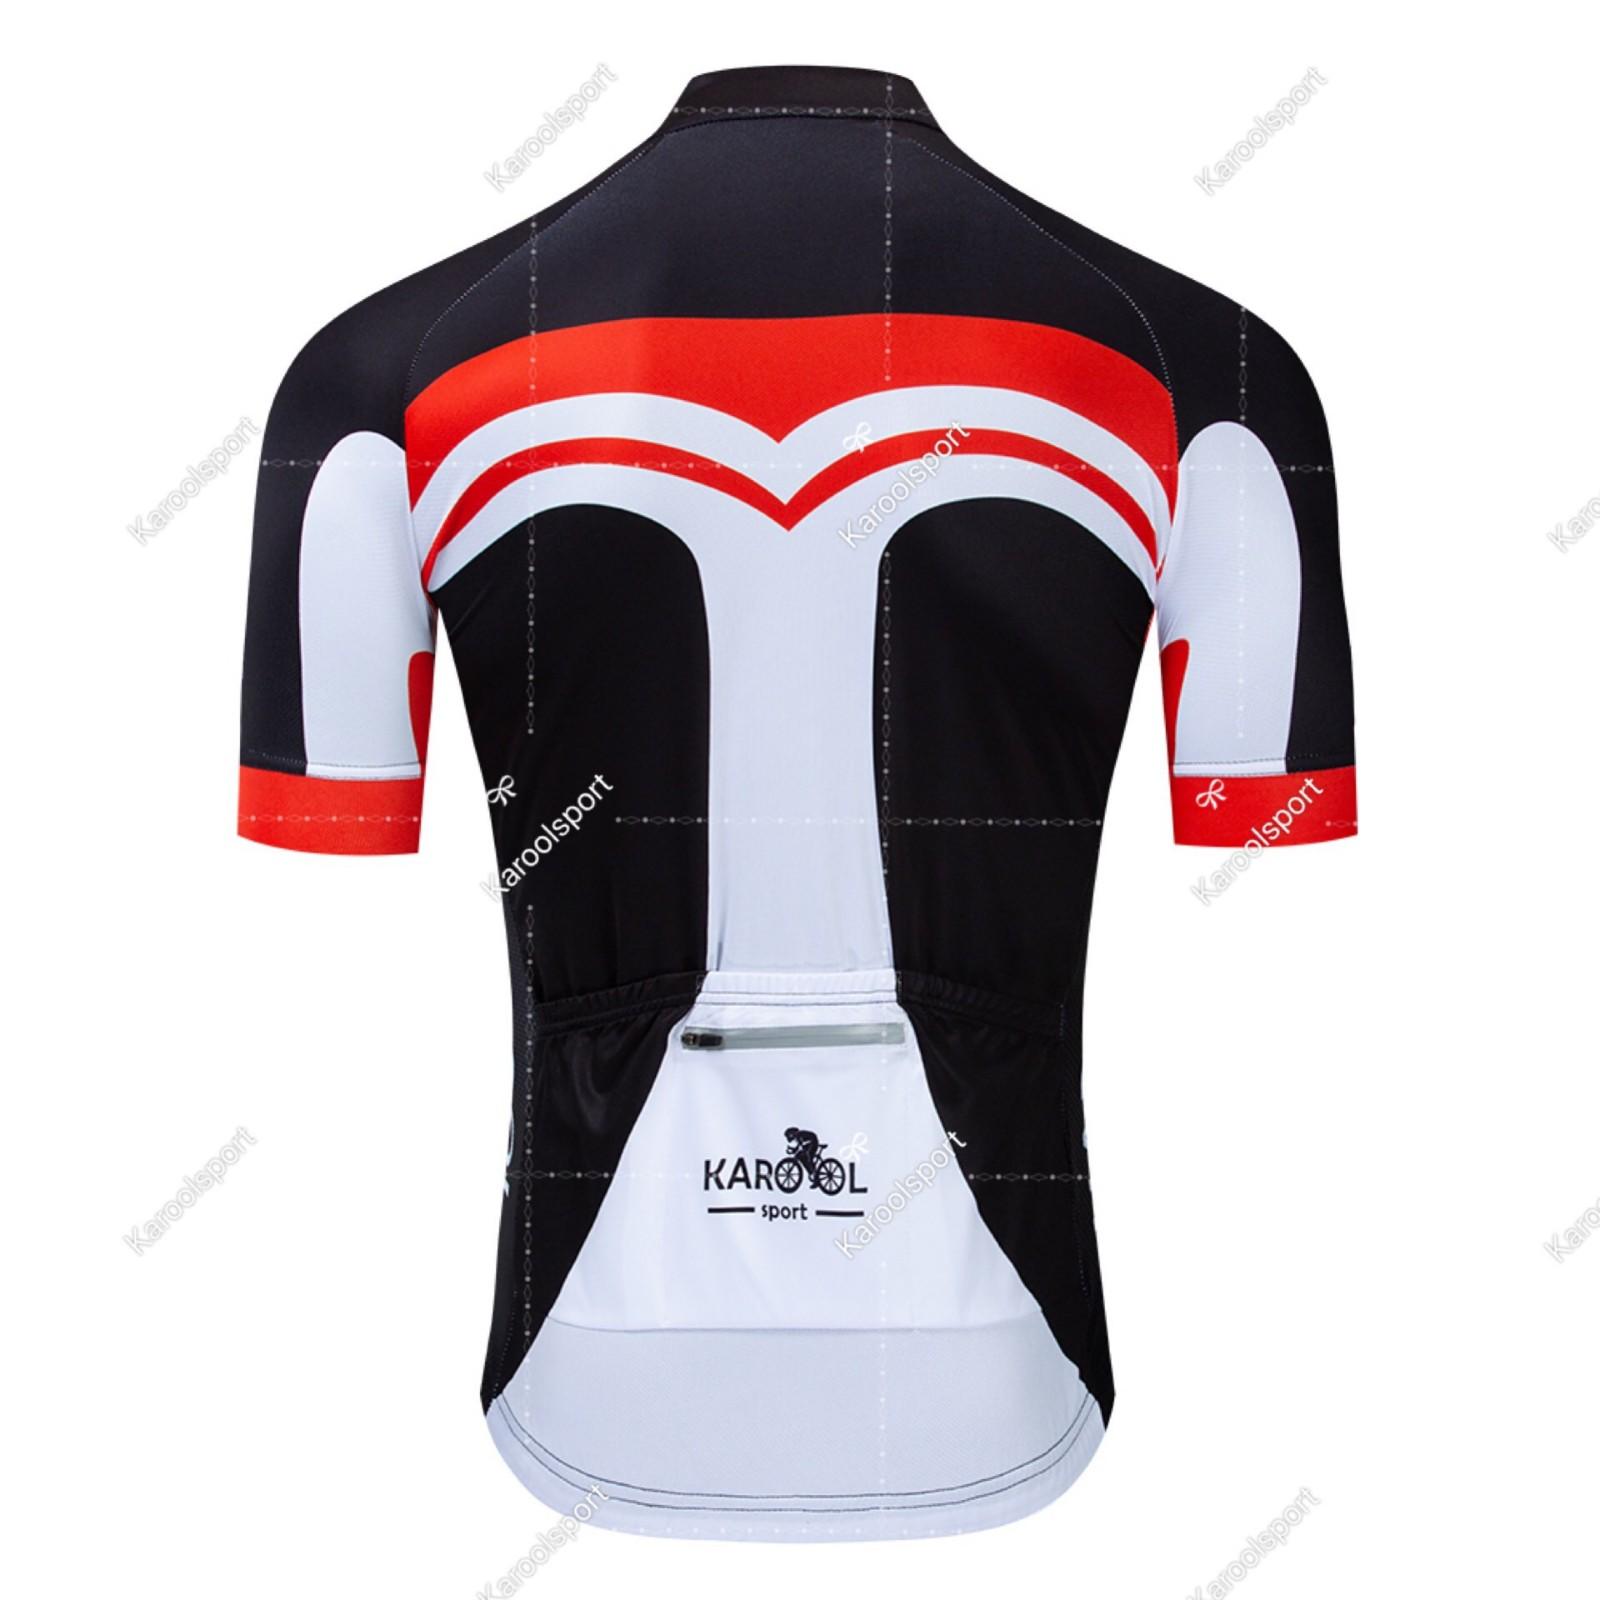 Karool team cycling jerseys with good price for women-3